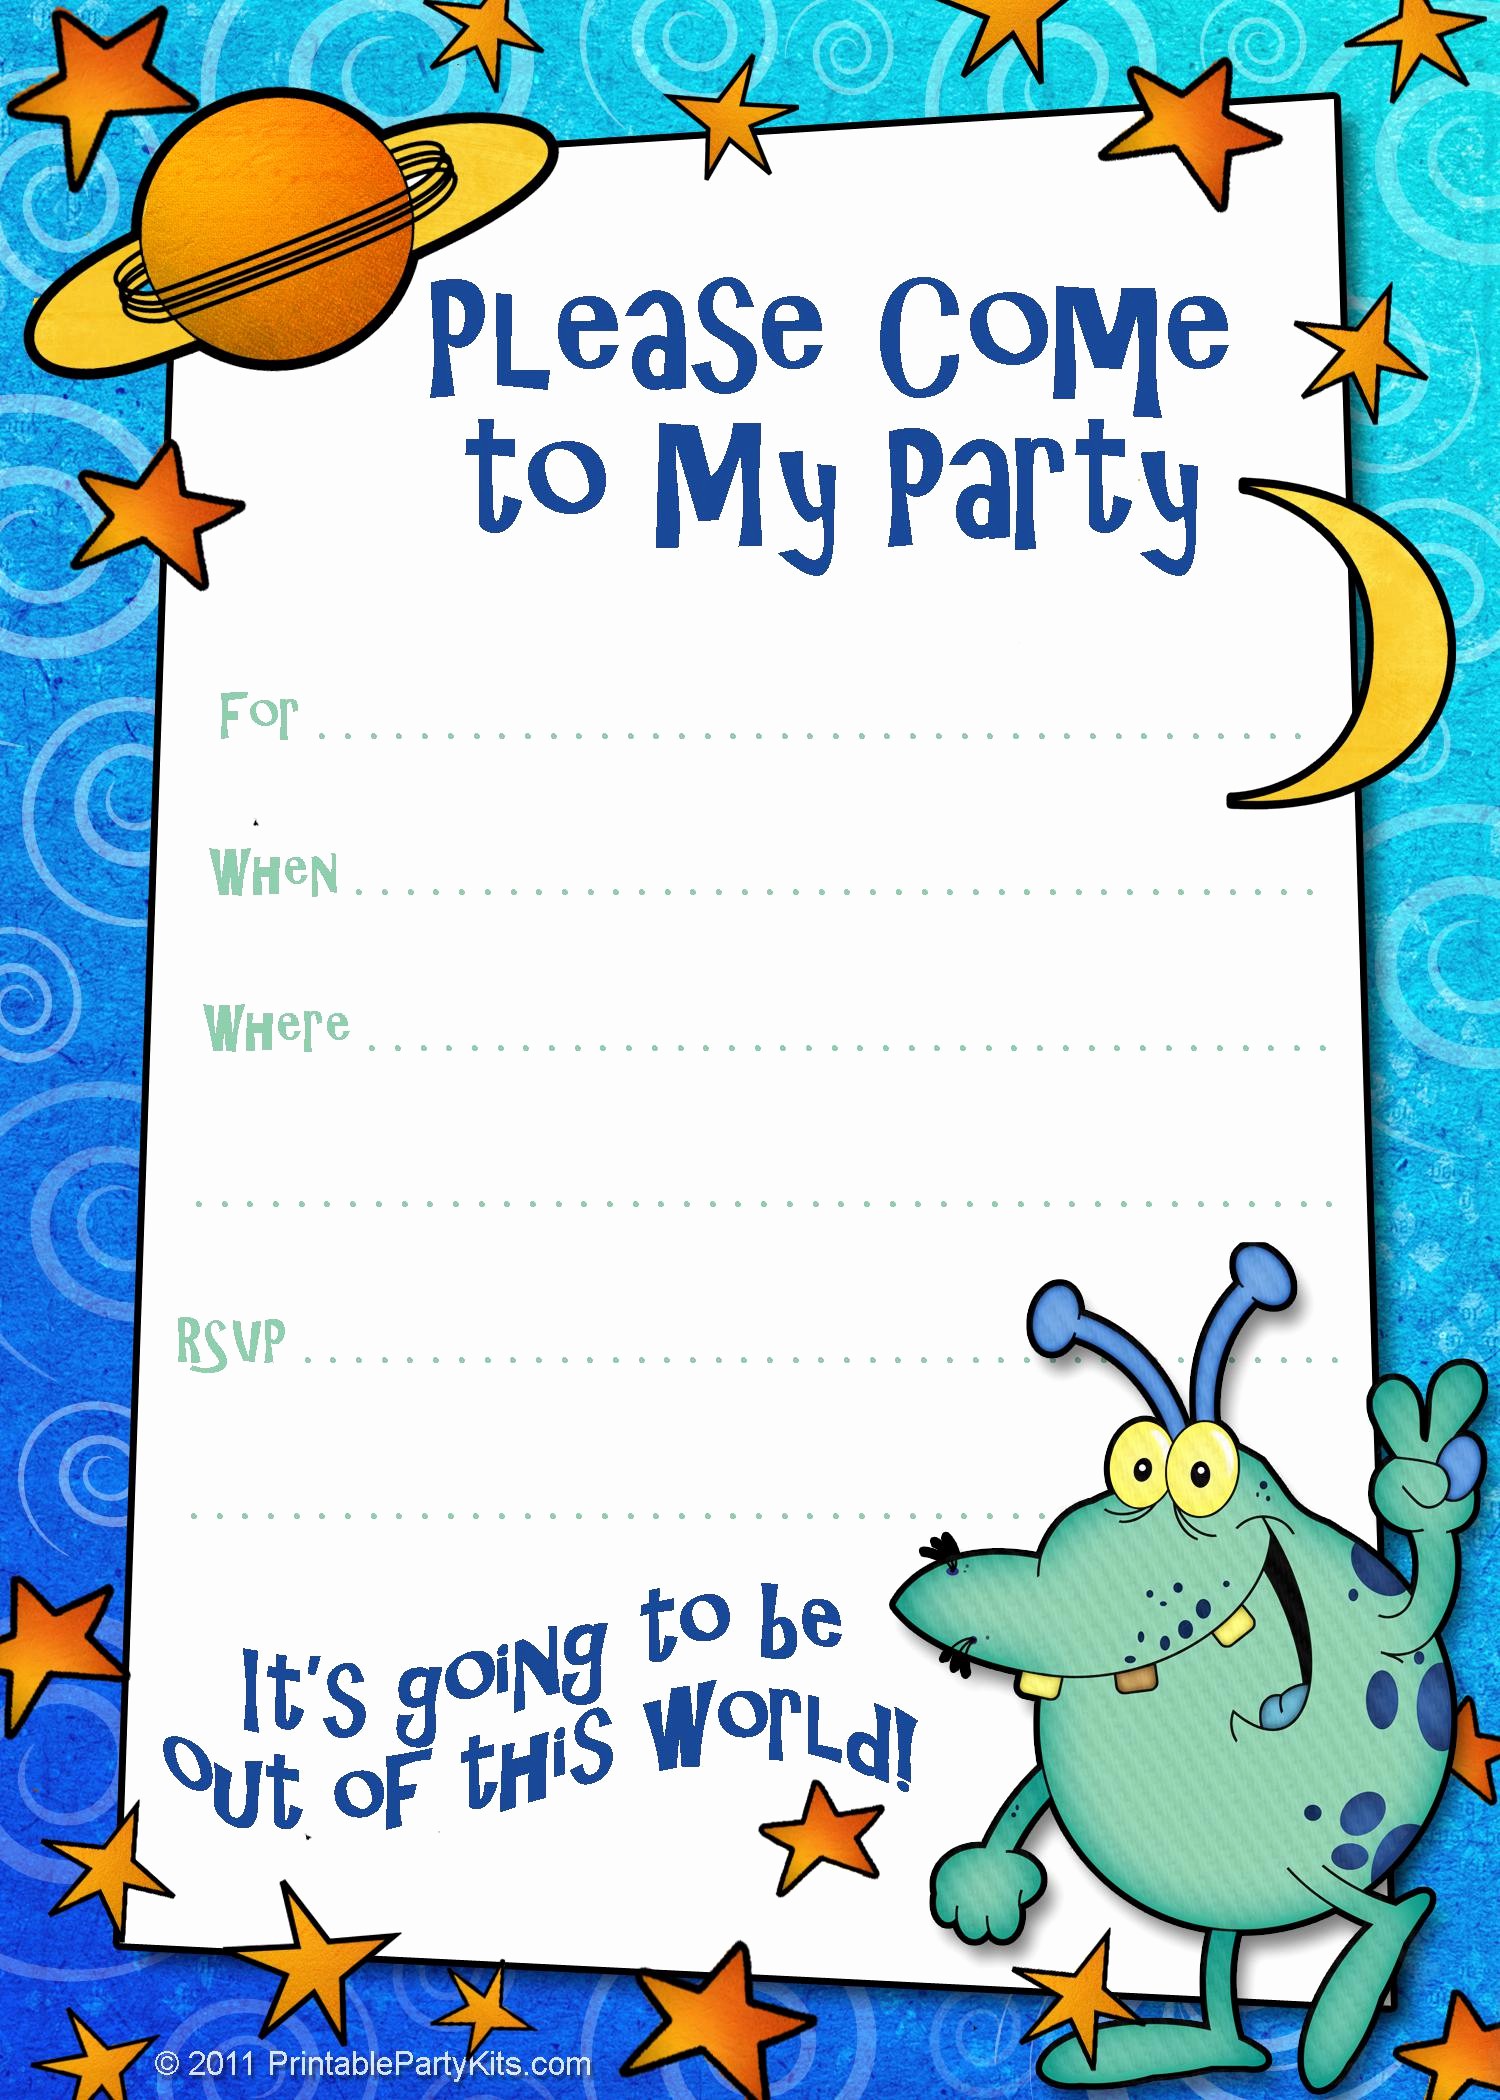 Party Invitation Templates Free Download Unique Free Printable Party Invitations Templates